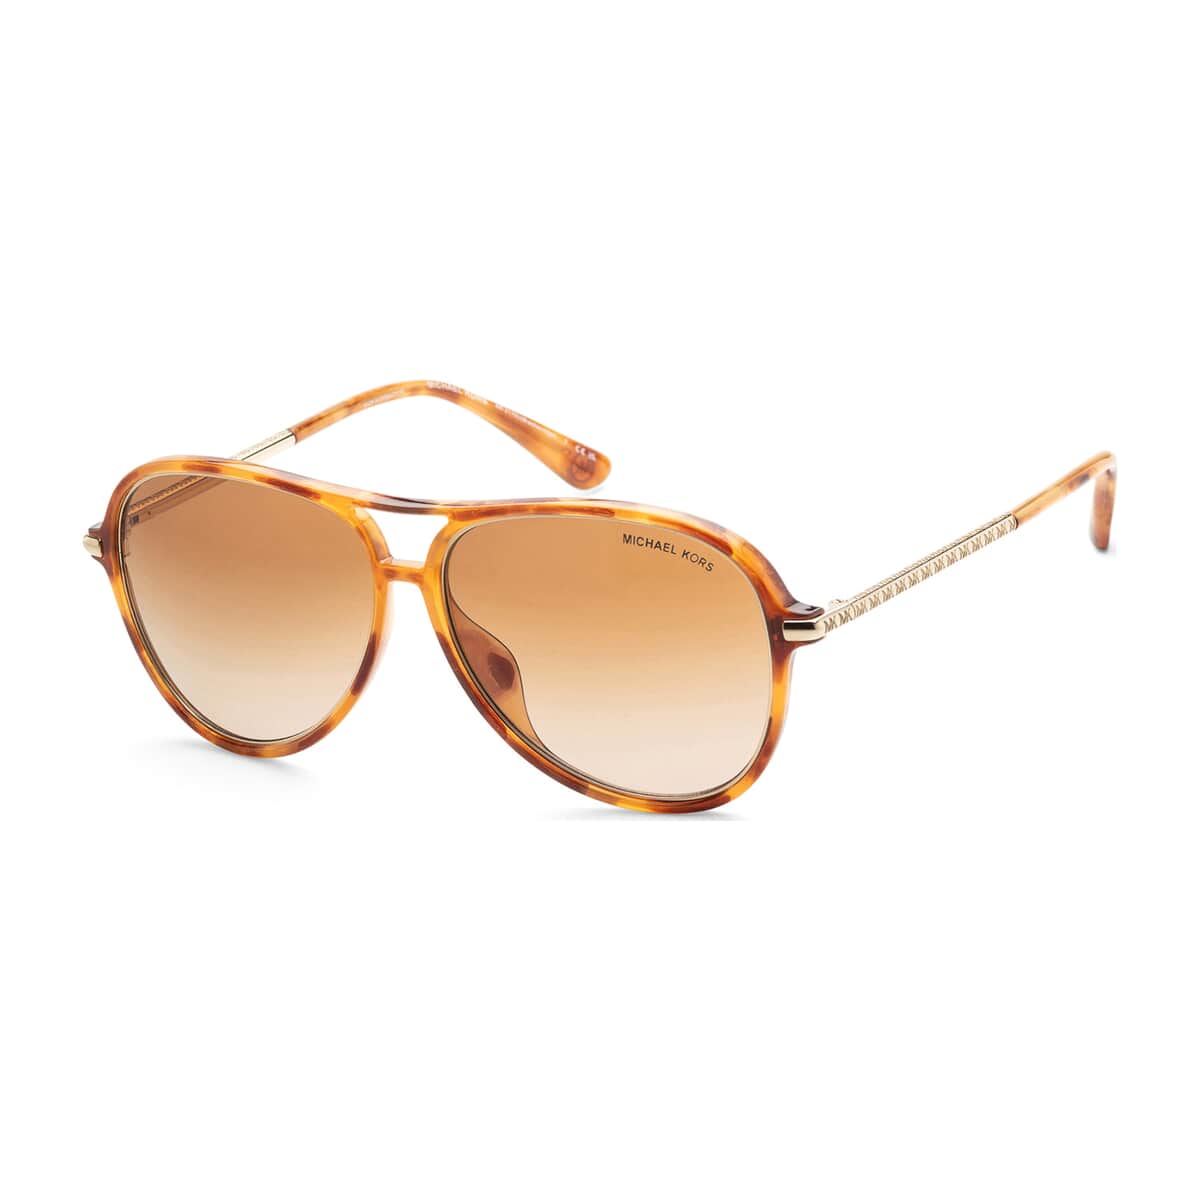 Michael Kors Women's Marigold Tortoise Aviator Sunglasses with Protection Case image number 0